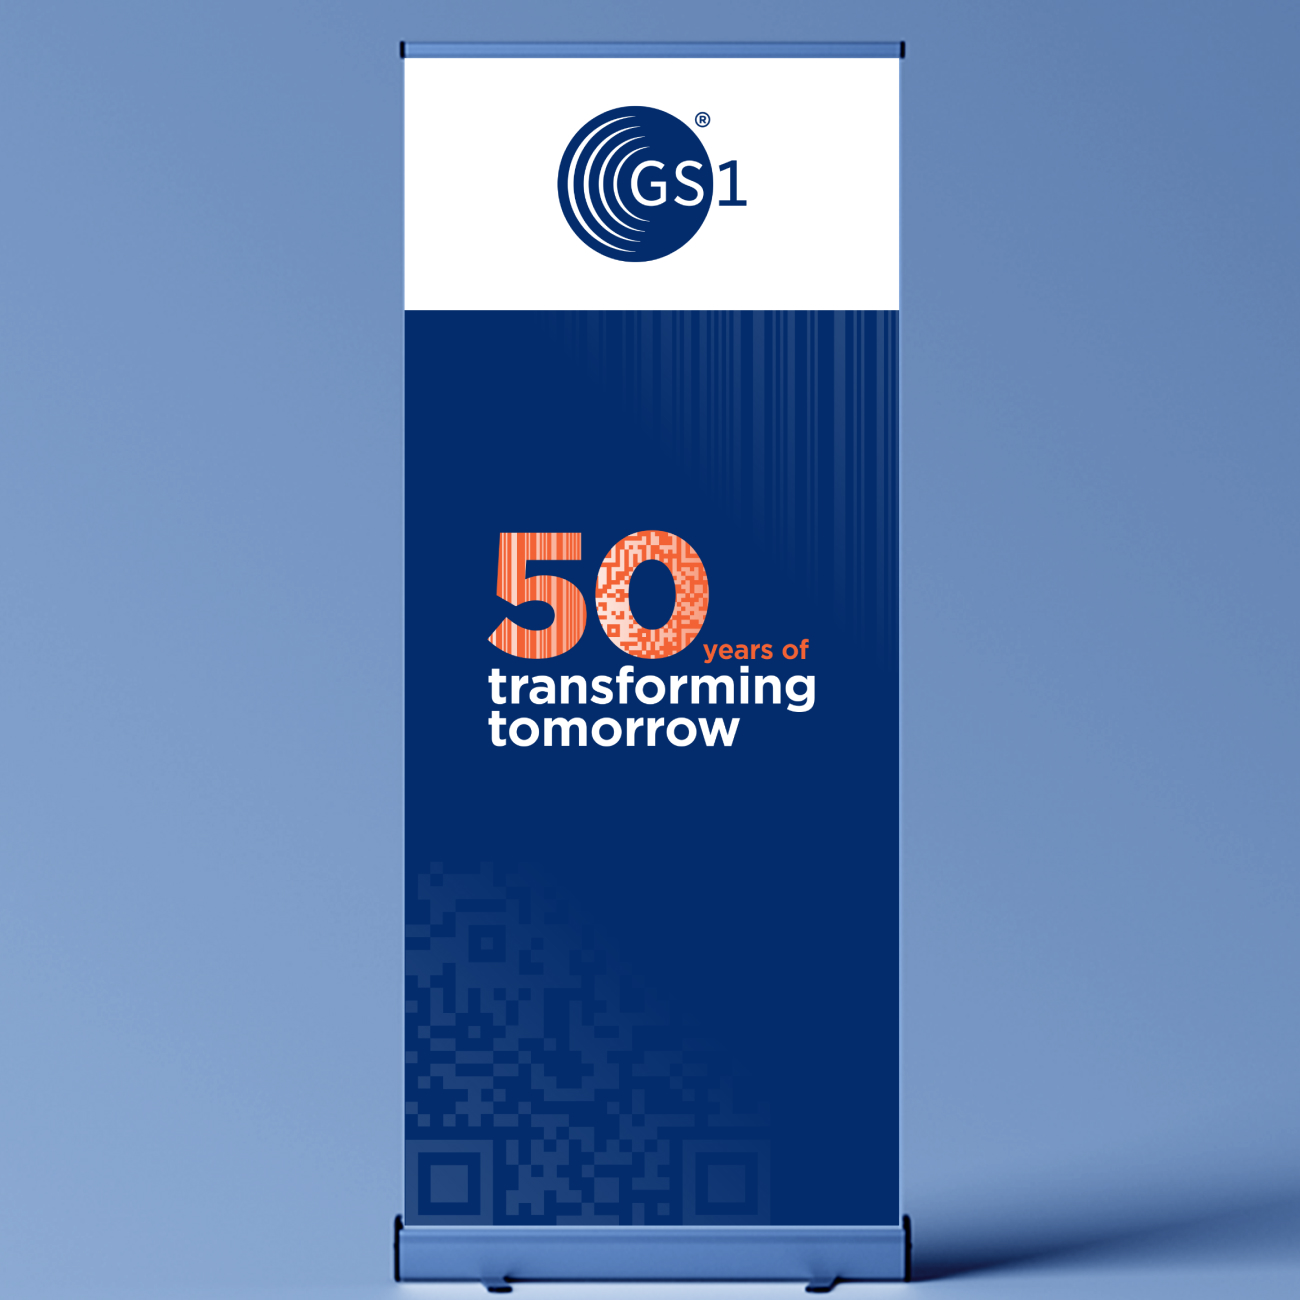 Design of GS1 banner design mockup showing text that says 50 years of transforming tomorrow